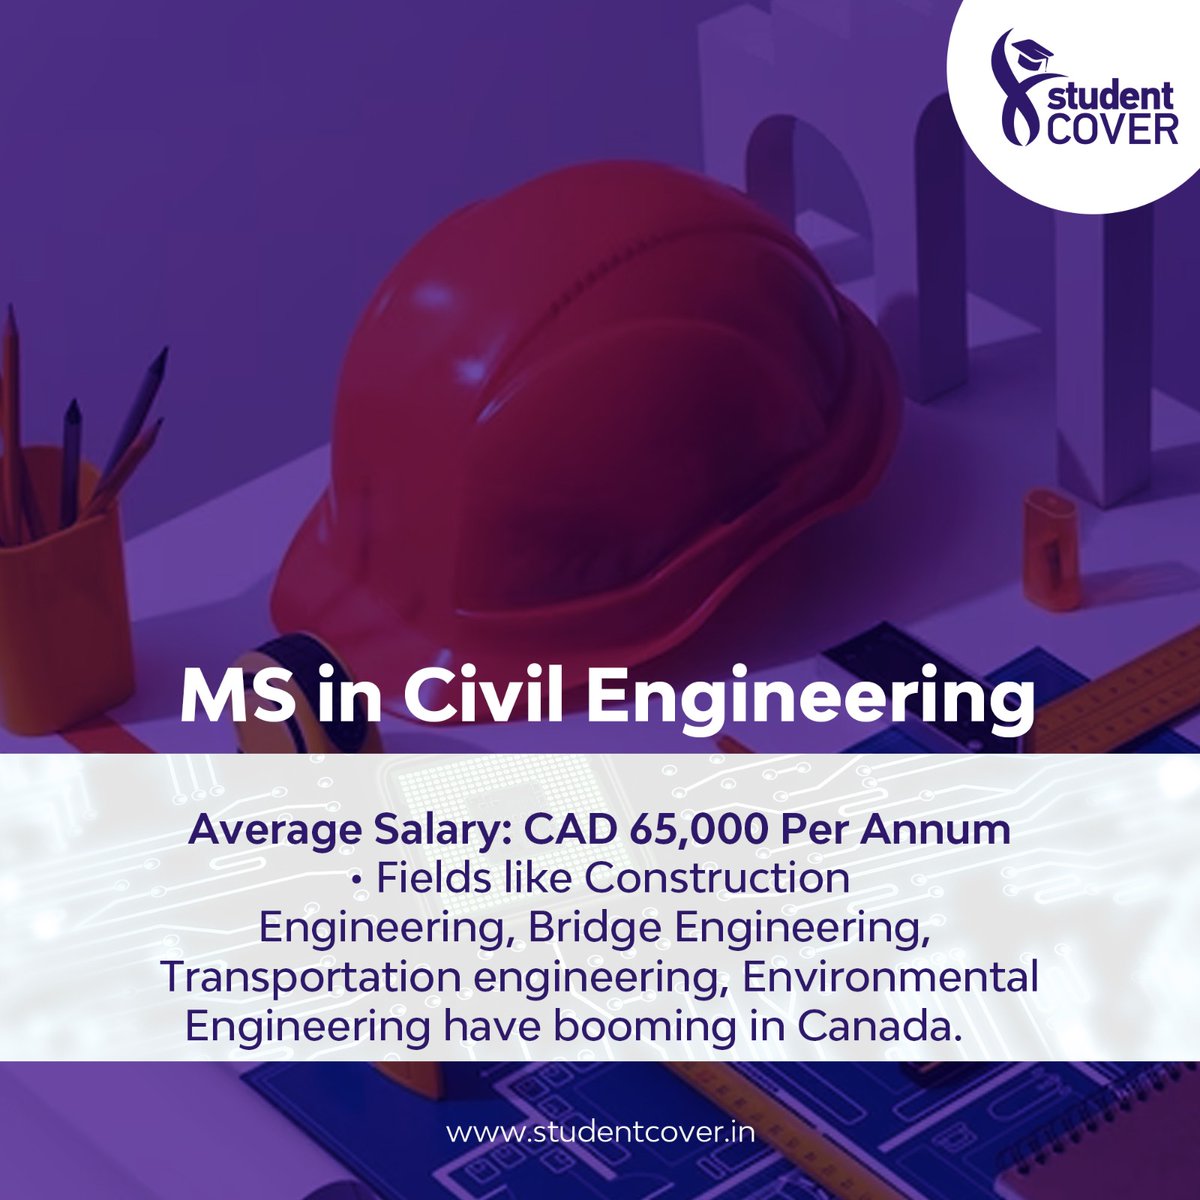 Dreaming of pursuing a Master's in Engineering in Canada? Discover the average salaries in various engineering fields after graduation. 

#studentcover #studyabroad #studyincanada #studyengineering #studyengineeringincanada #EngineeringMasters #CanadianEducation